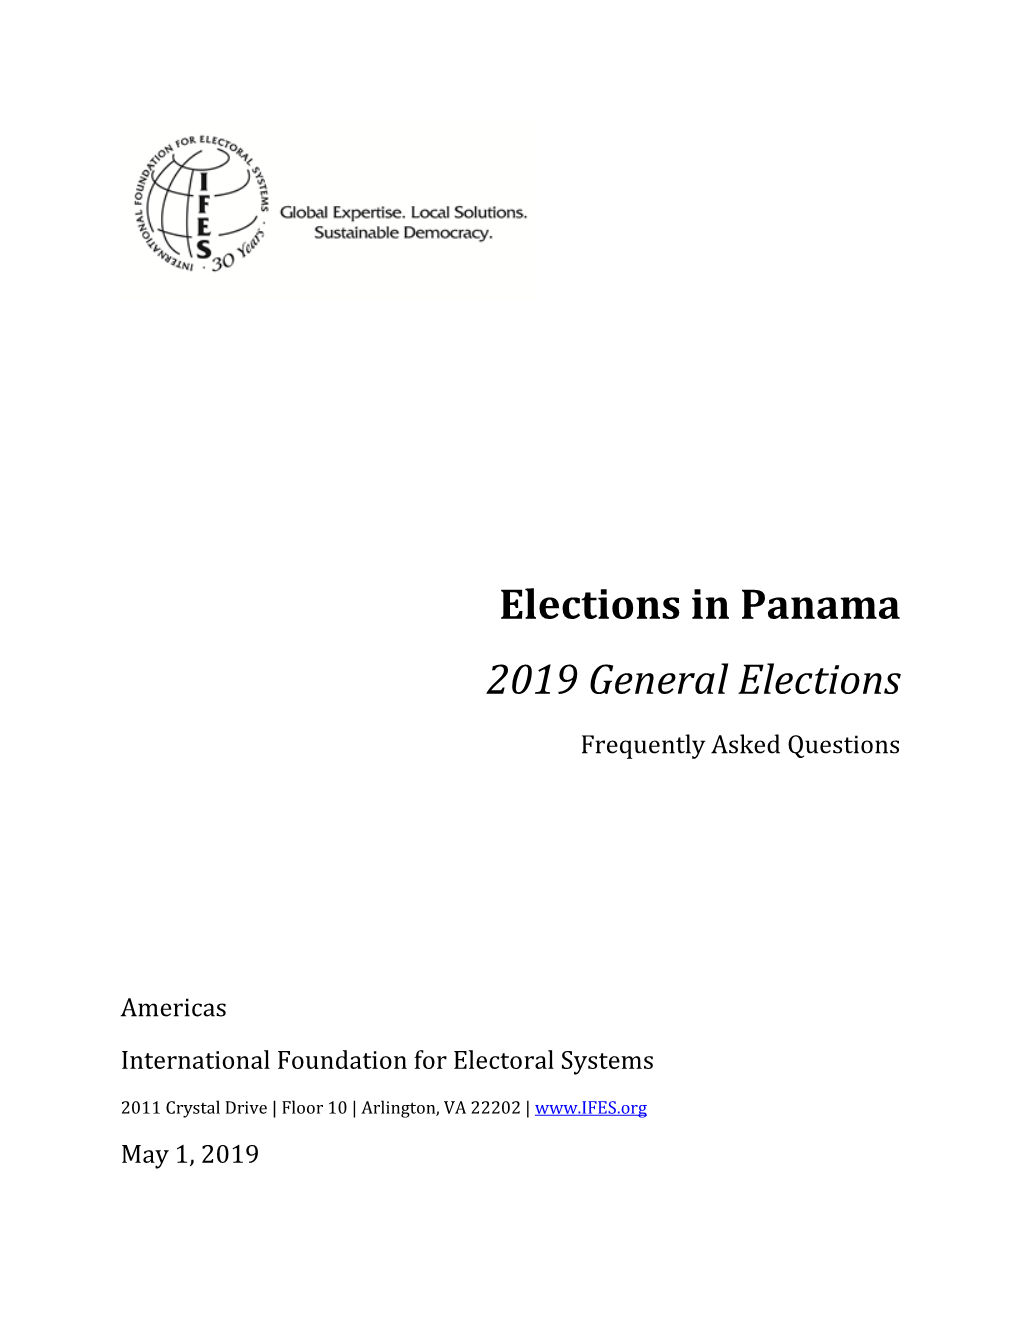 IFES Faqs on Elections in Panama: 2019 General Elections